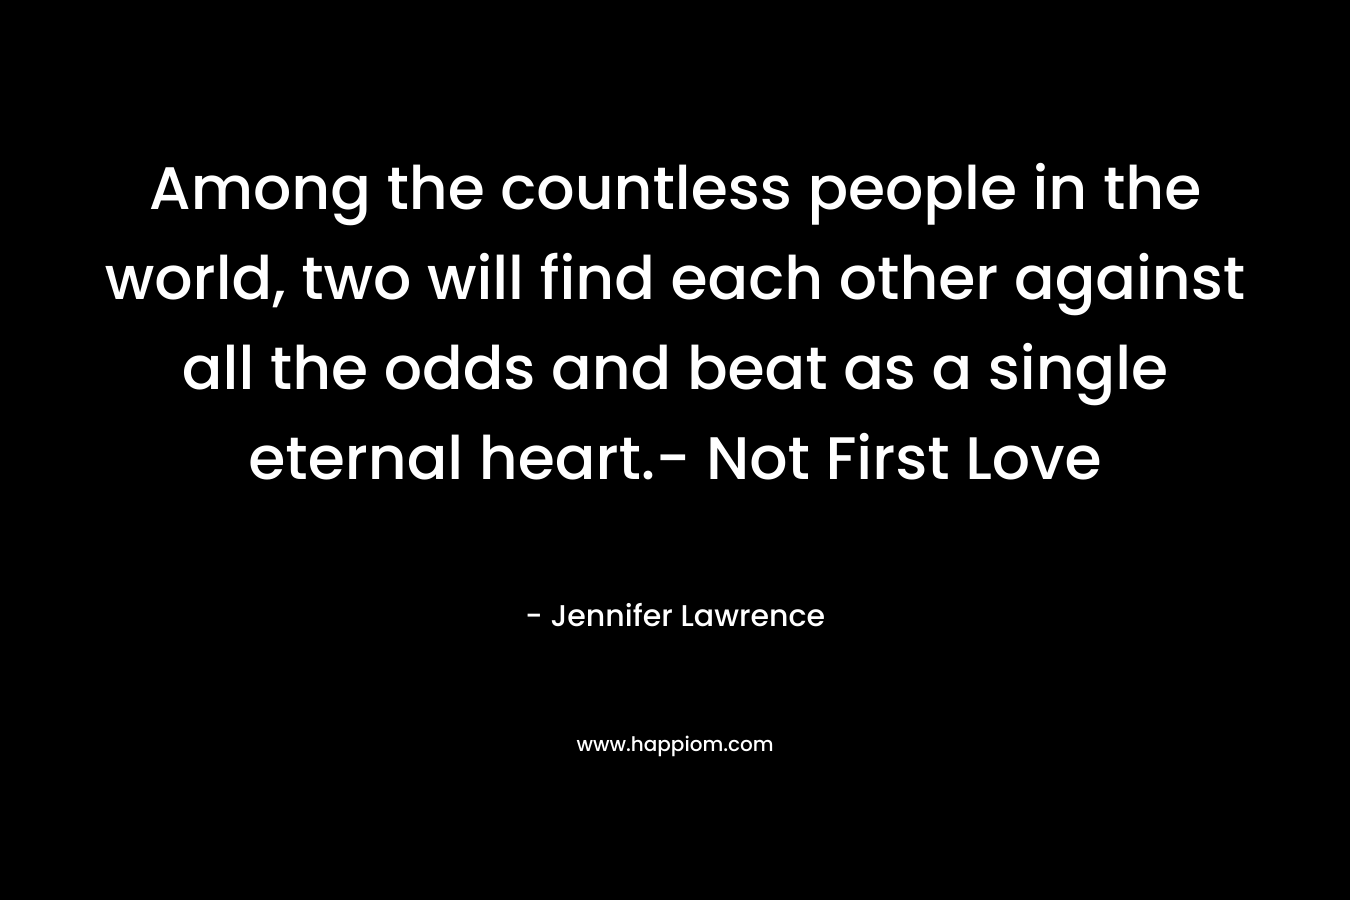 Among the countless people in the world, two will find each other against all the odds and beat as a single eternal heart.- Not First Love